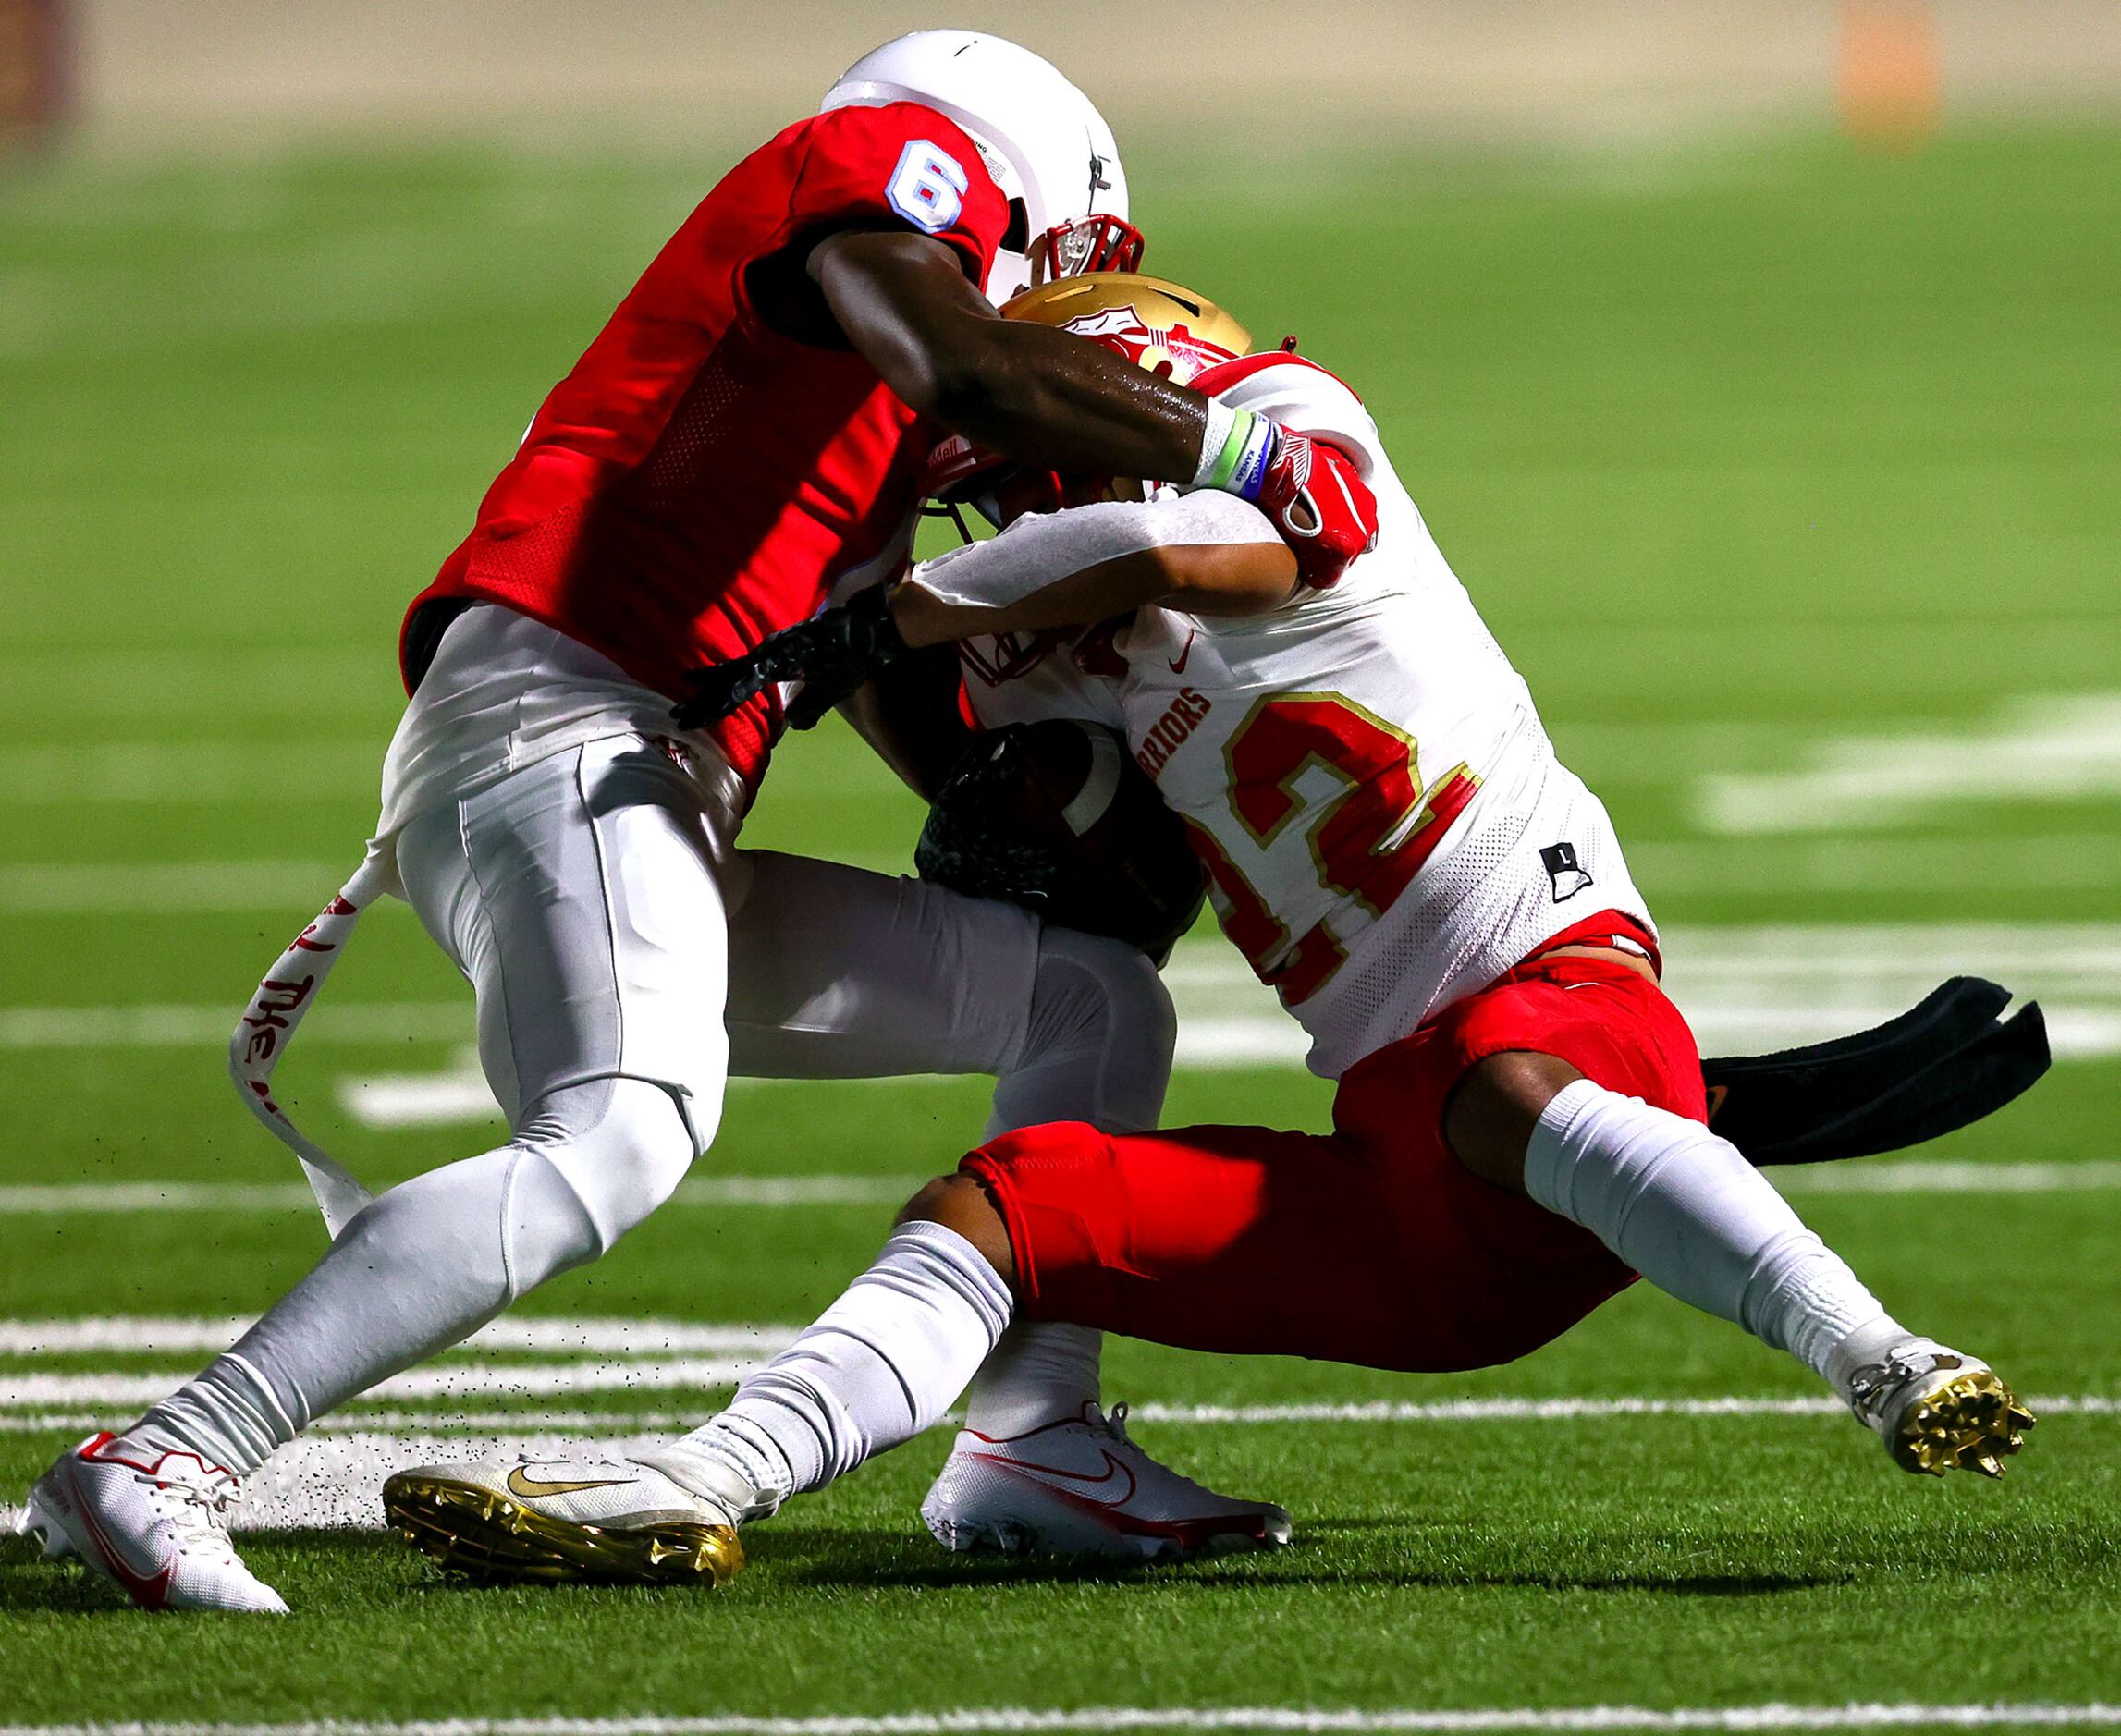 South Grand Prairie running back Jaden Stanley (22) gets stuffed on the play by Skyline...